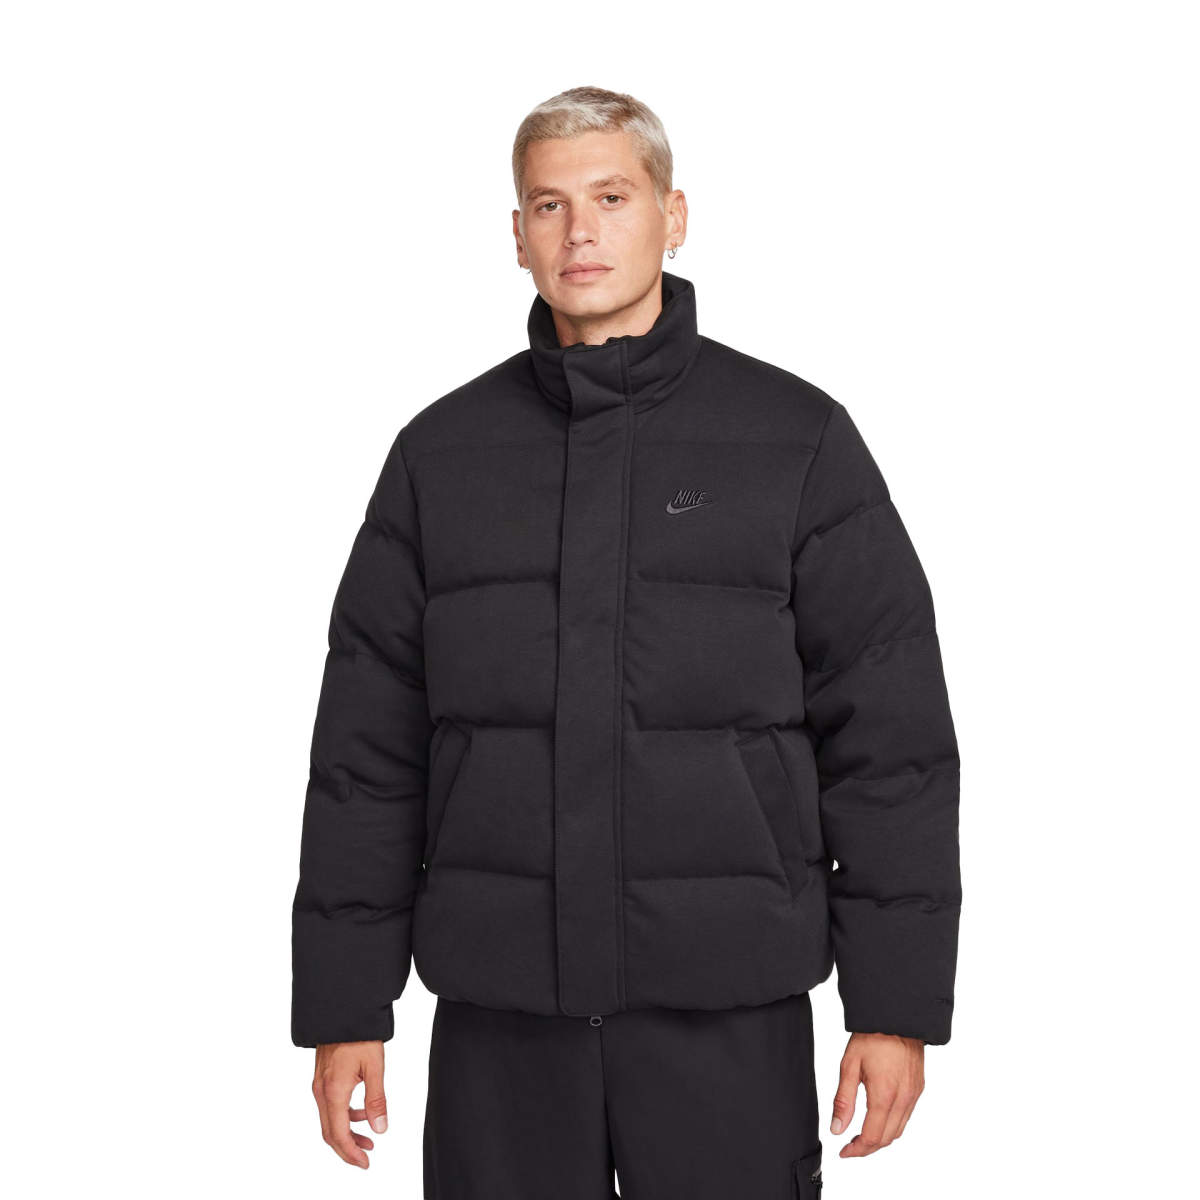 Tech Fleece Therma Puffer Jacket - product FB7854-010 | Airness